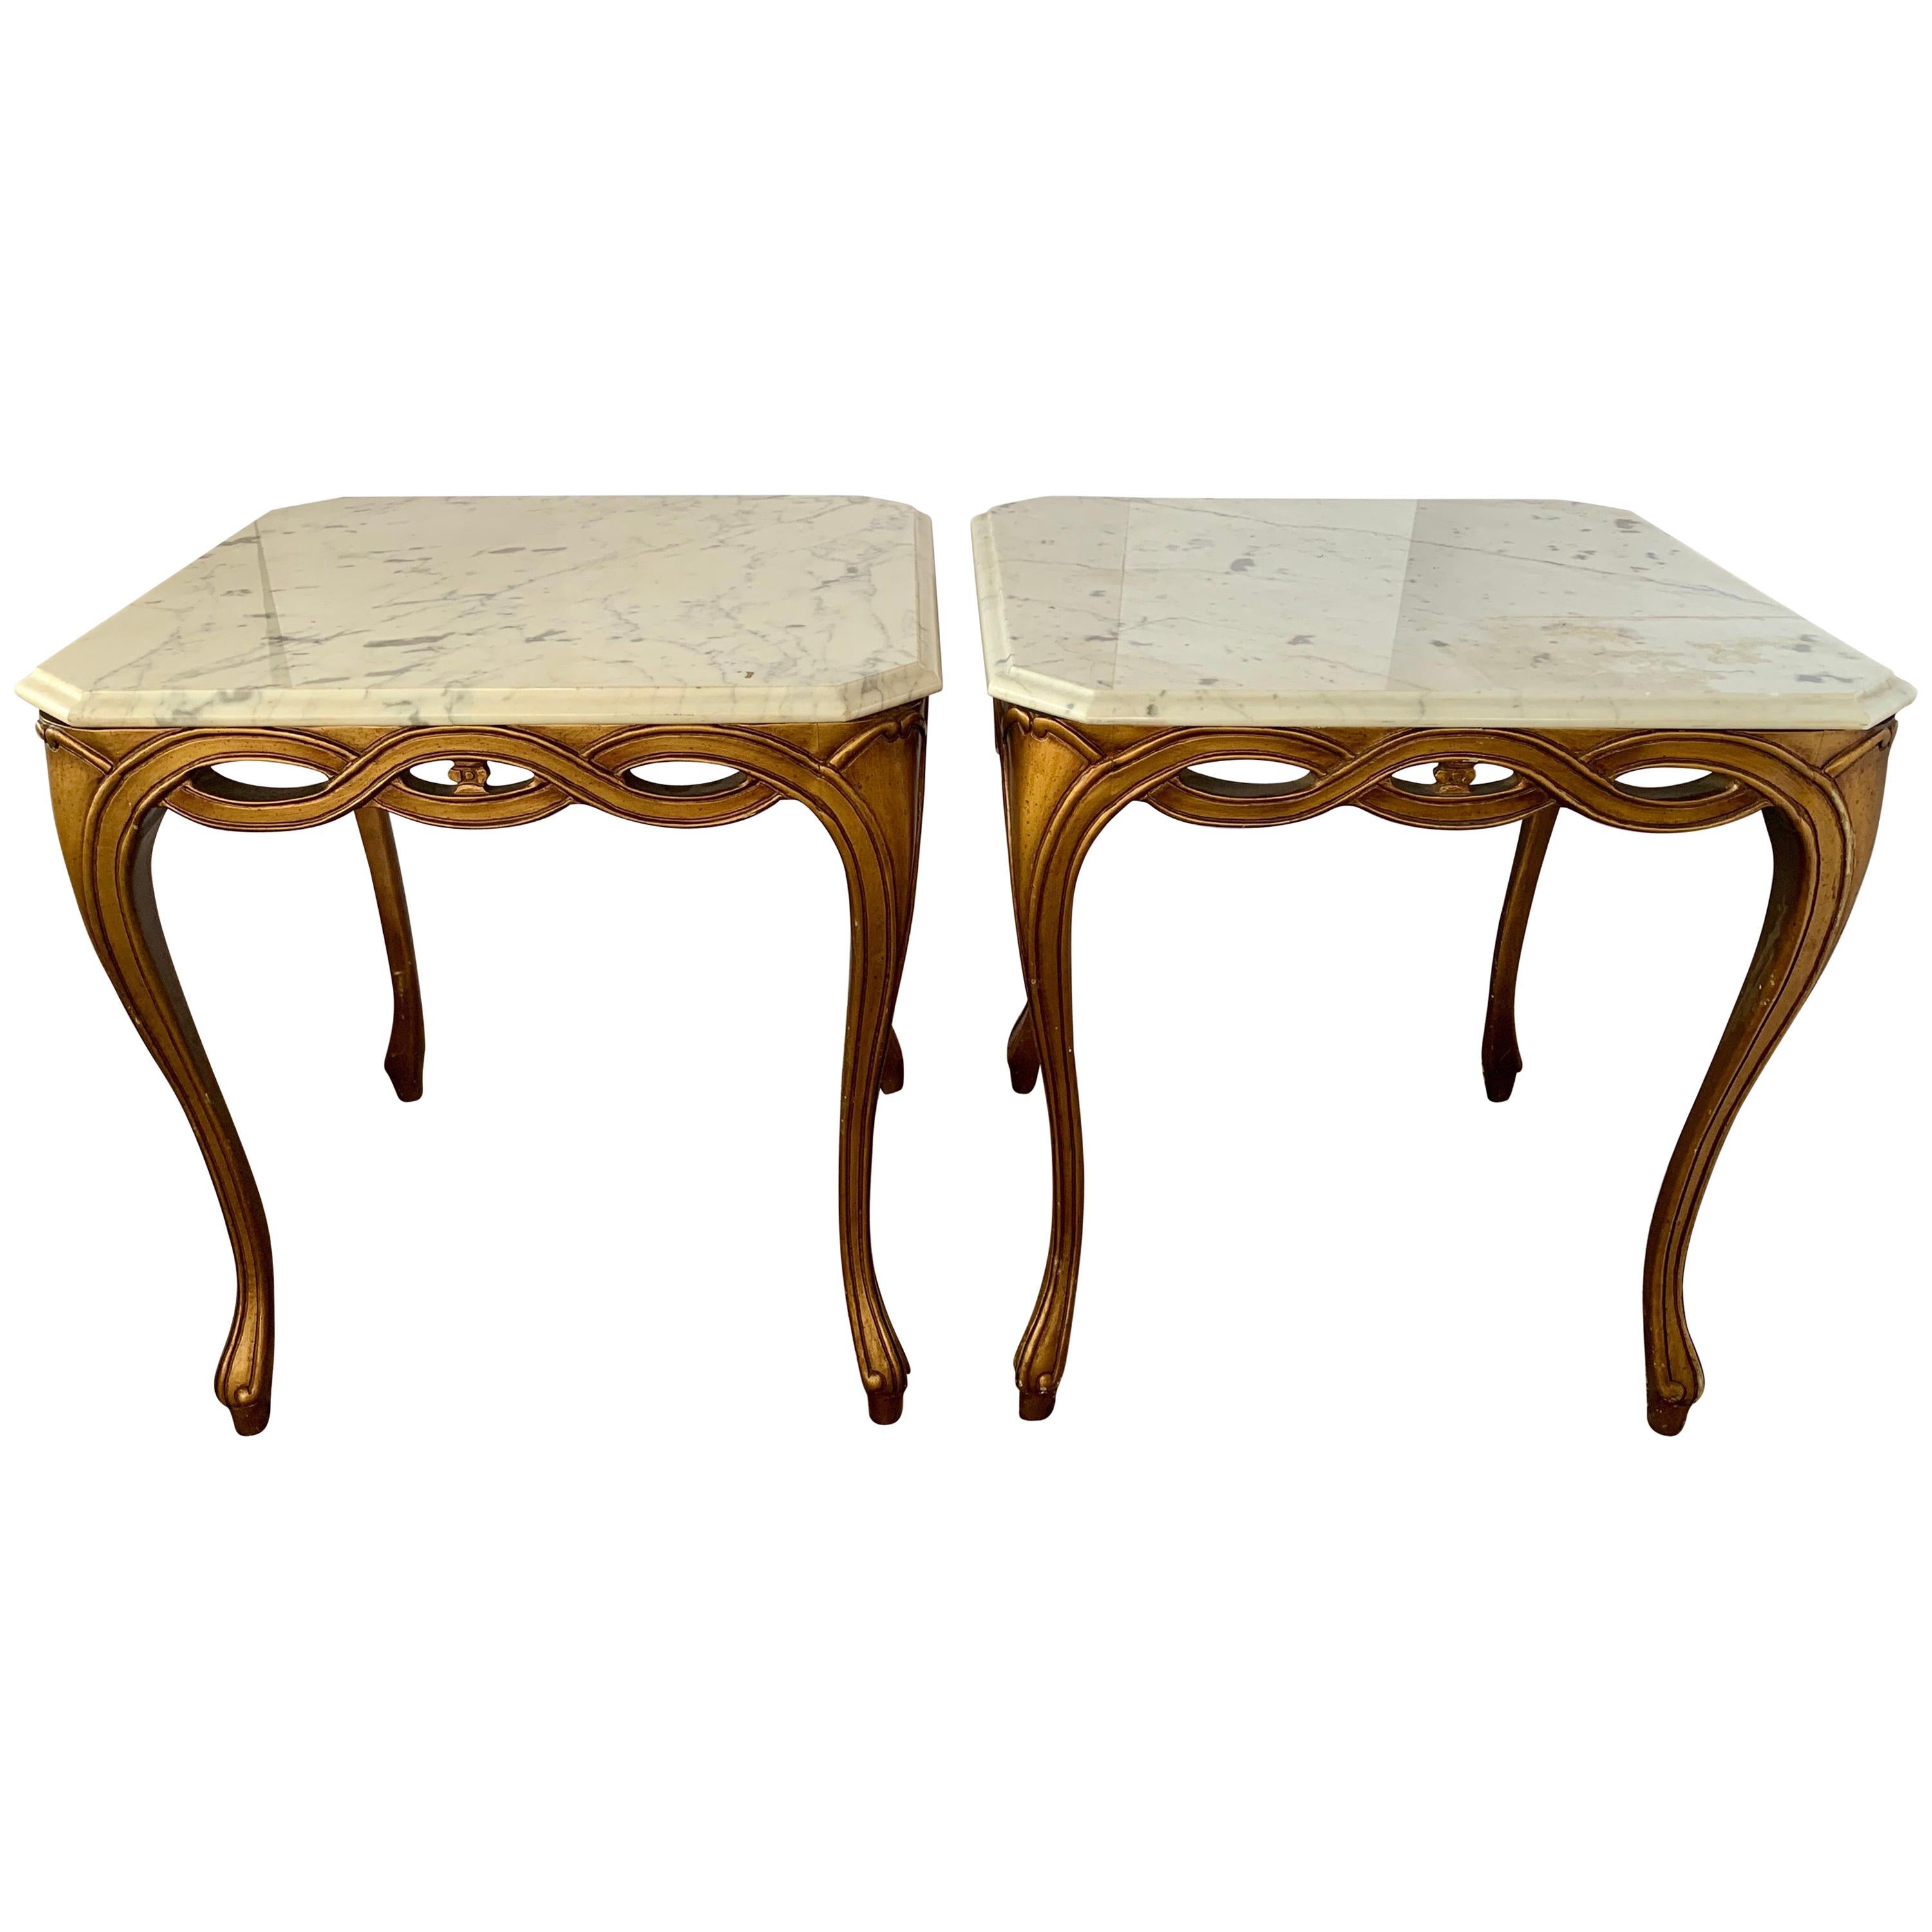 Vintage Hollywood Regency Gold Giltwood Marble-Top End Tables Mid-Century Modern